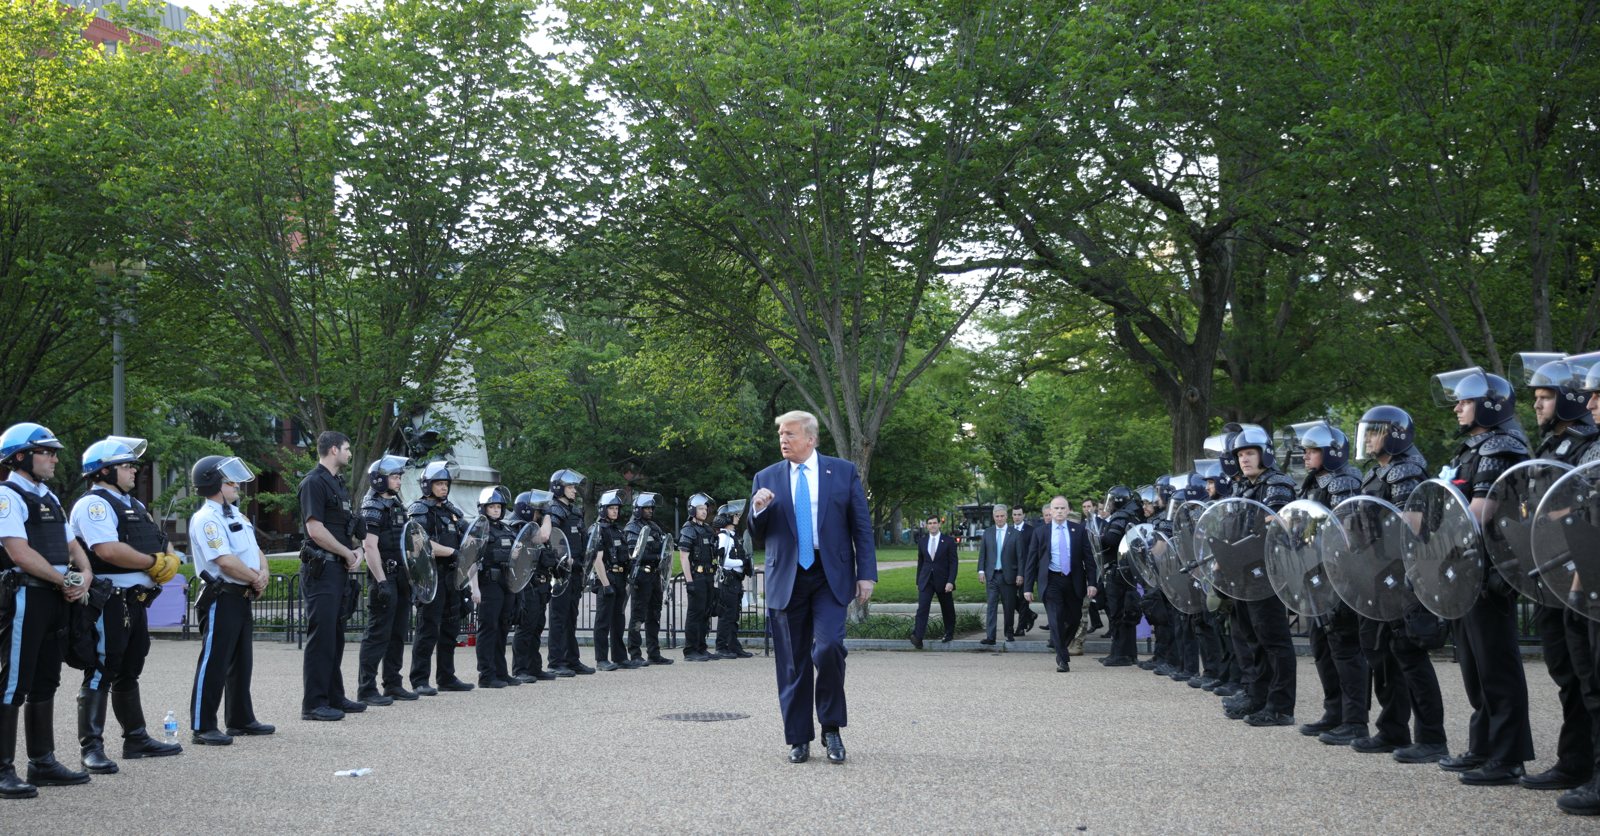 Donald Trump walking past riot police in Lafayette Park during protests following the police killing of George Floyd, Washington, D.C., June 2020